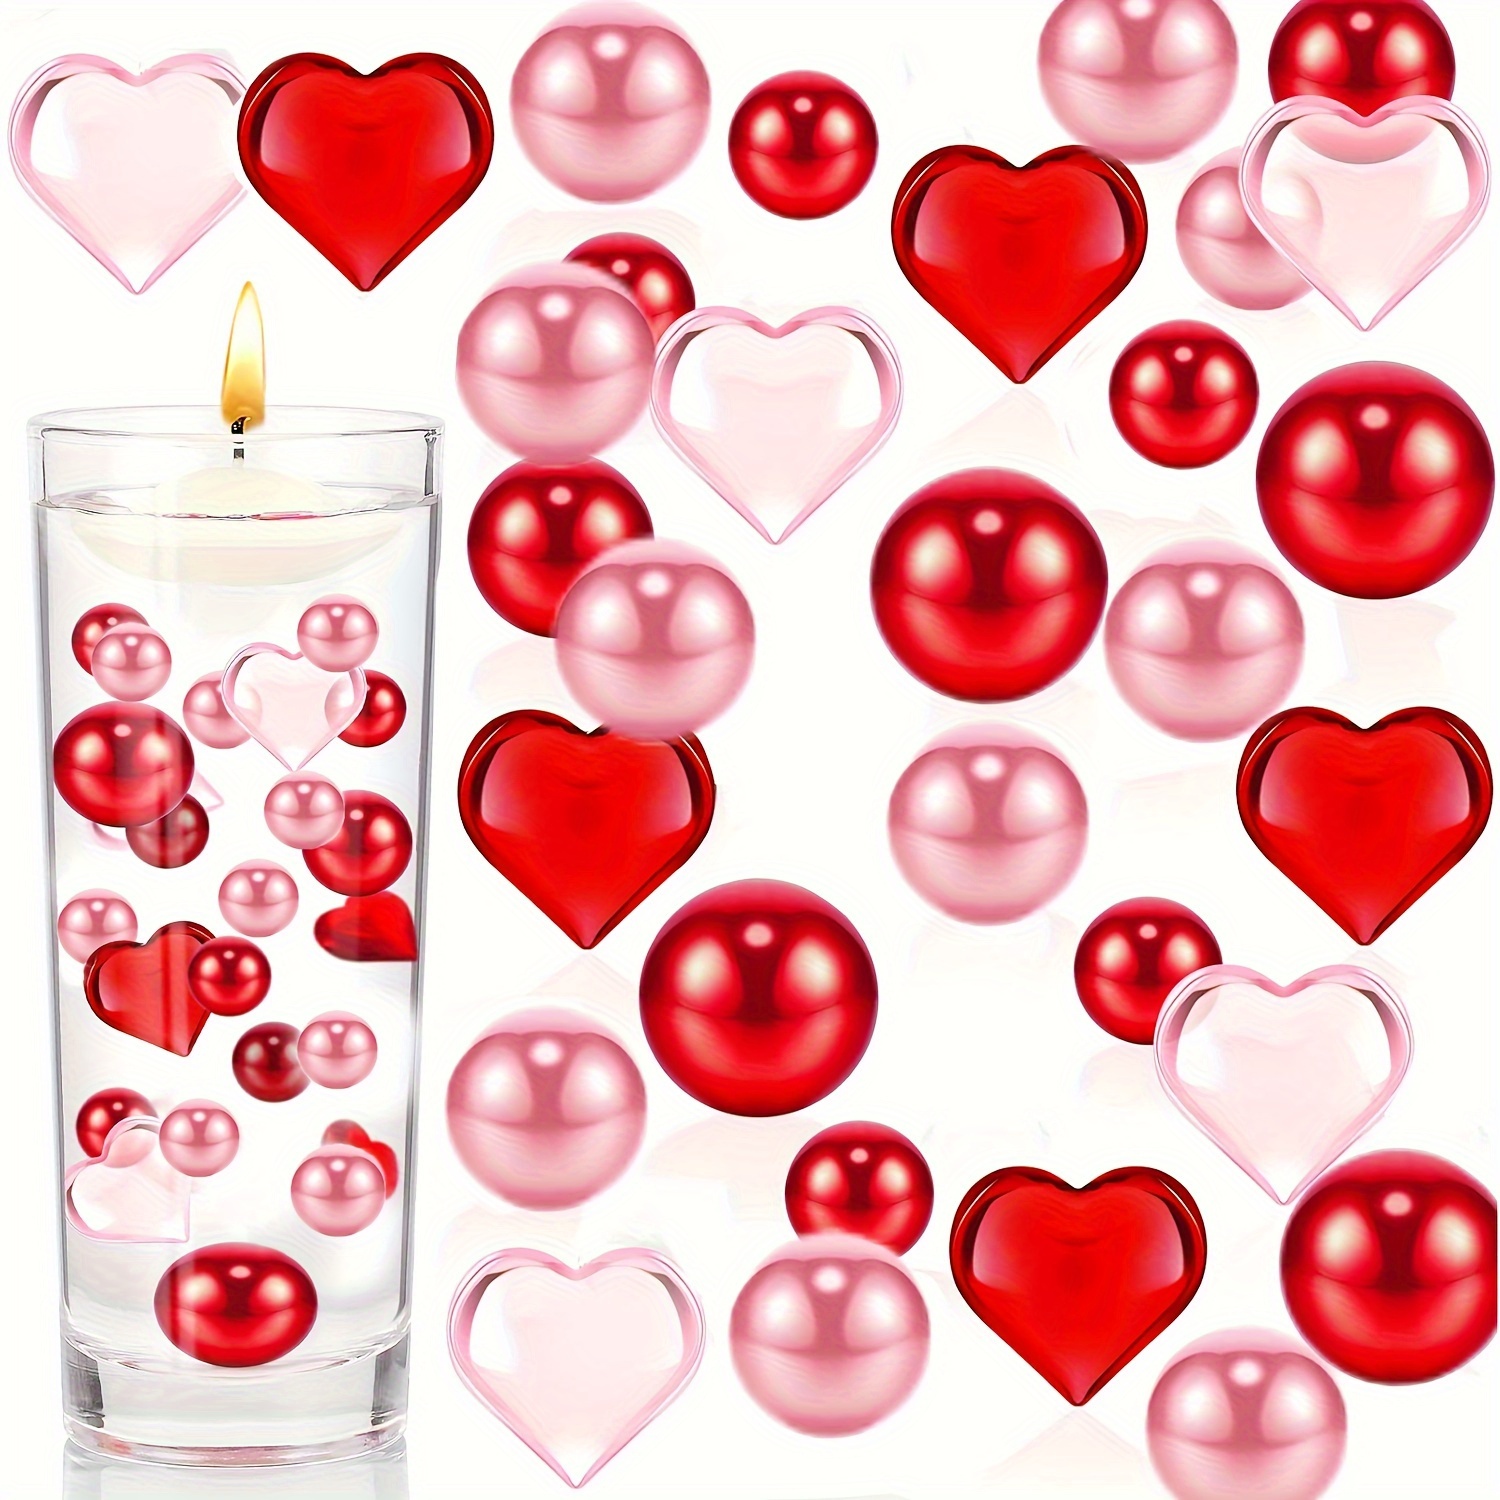 Chiccall Valentine's Day Decor 6076Pcs Vase Filler Heart Pearl Water Gel  Bead Floating Candles Centerpiece For Valentine's Day Wedding Decor 